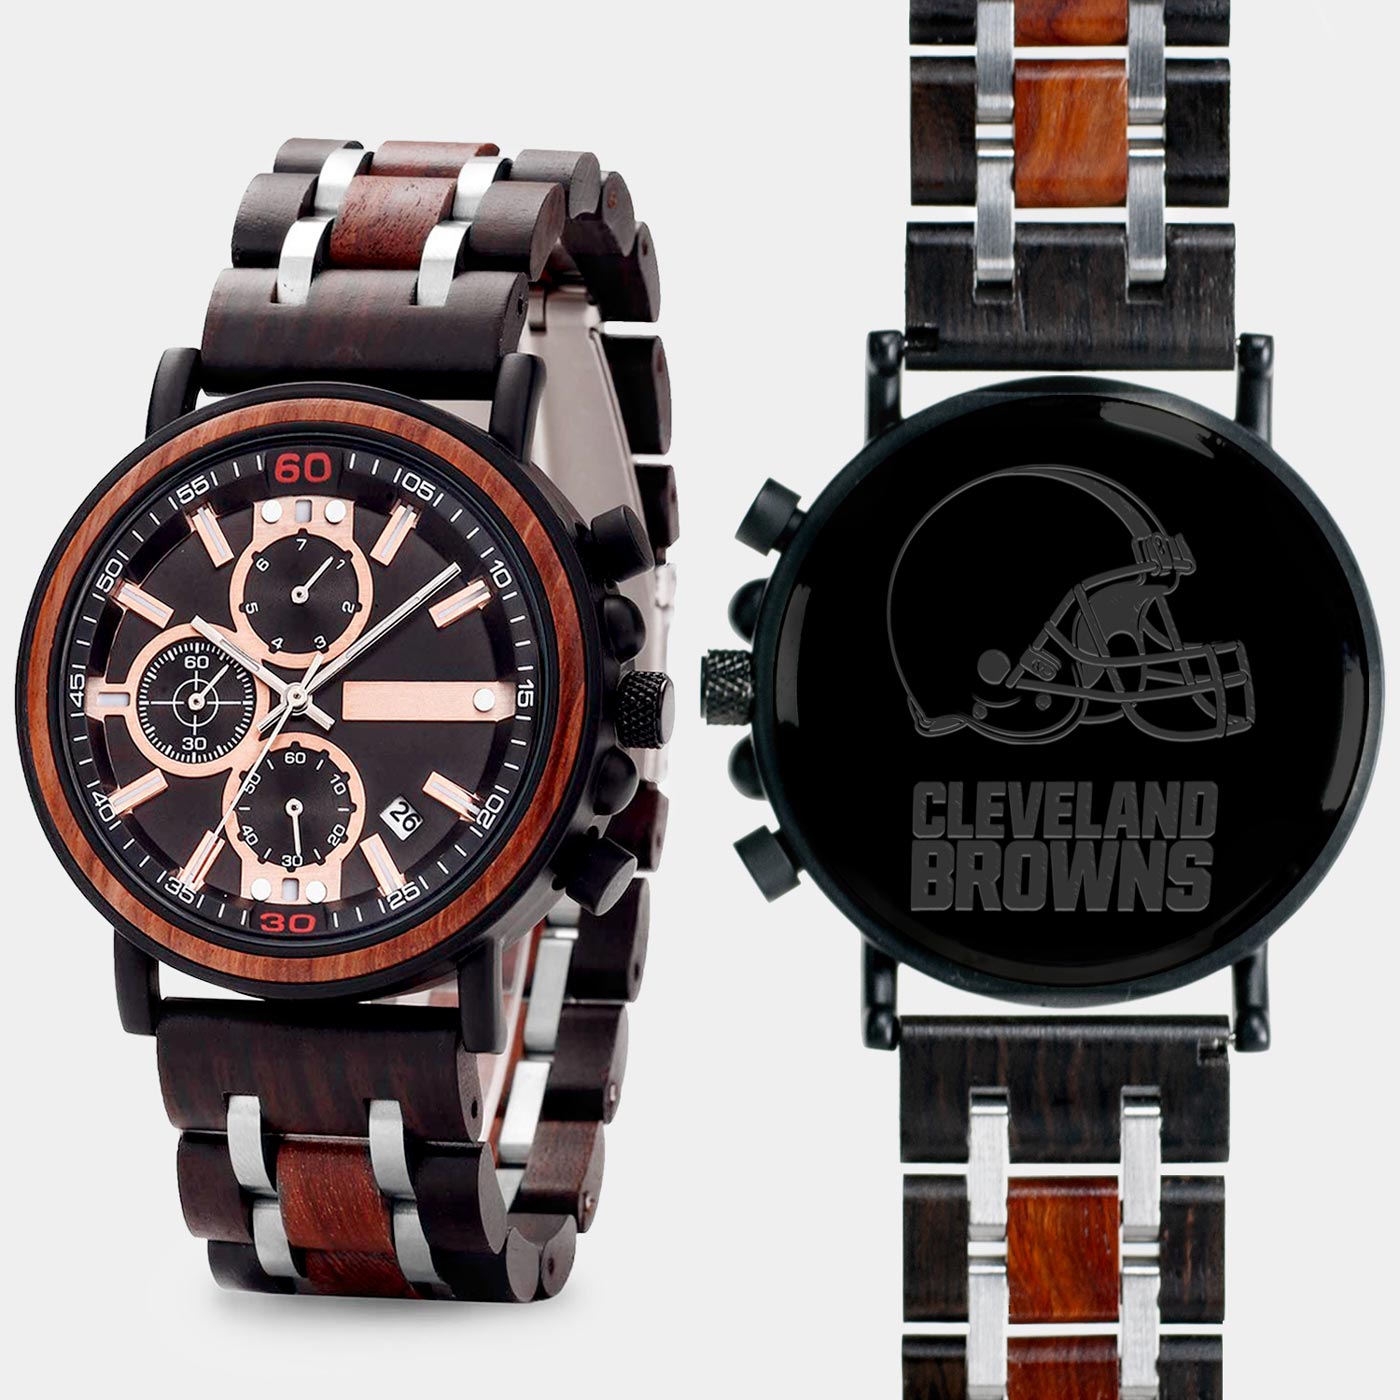 Cleveland Browns Mens Wrist Watch  - Personalized Cleveland Browns Mens Watches - Custom Gifts For Him, Birthday Gifts, Gift For Dad - Best 2022 Cleveland Browns Christmas Gifts - Black 45mm NFL Wood Watch